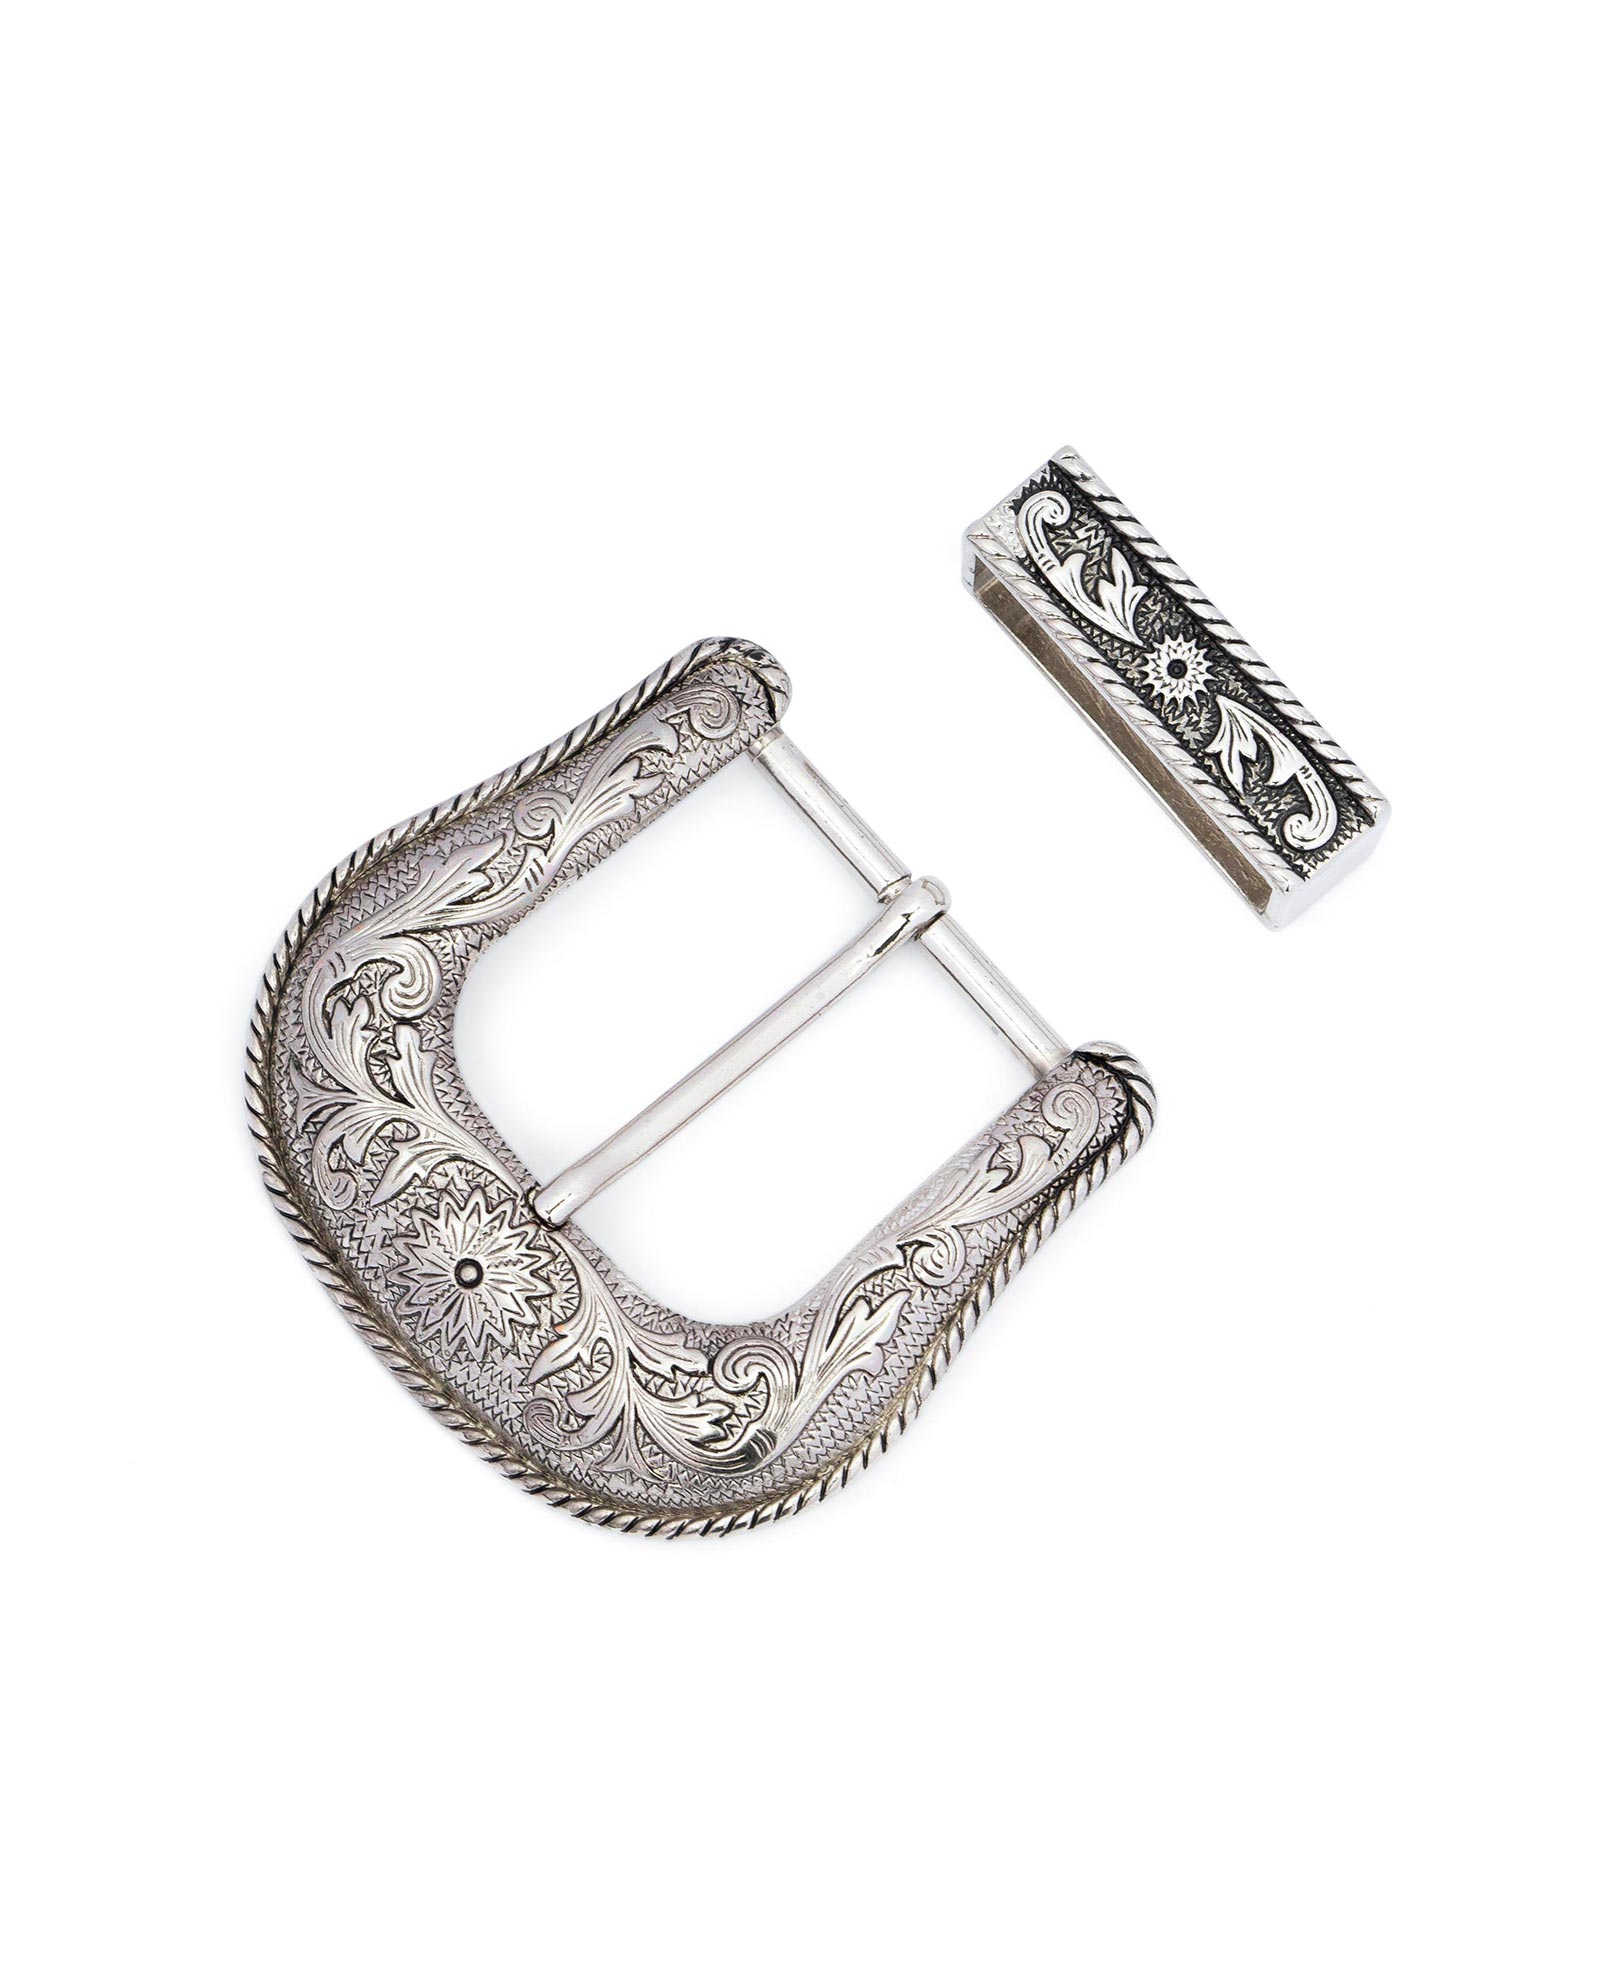 Limited Edition LF Buckle